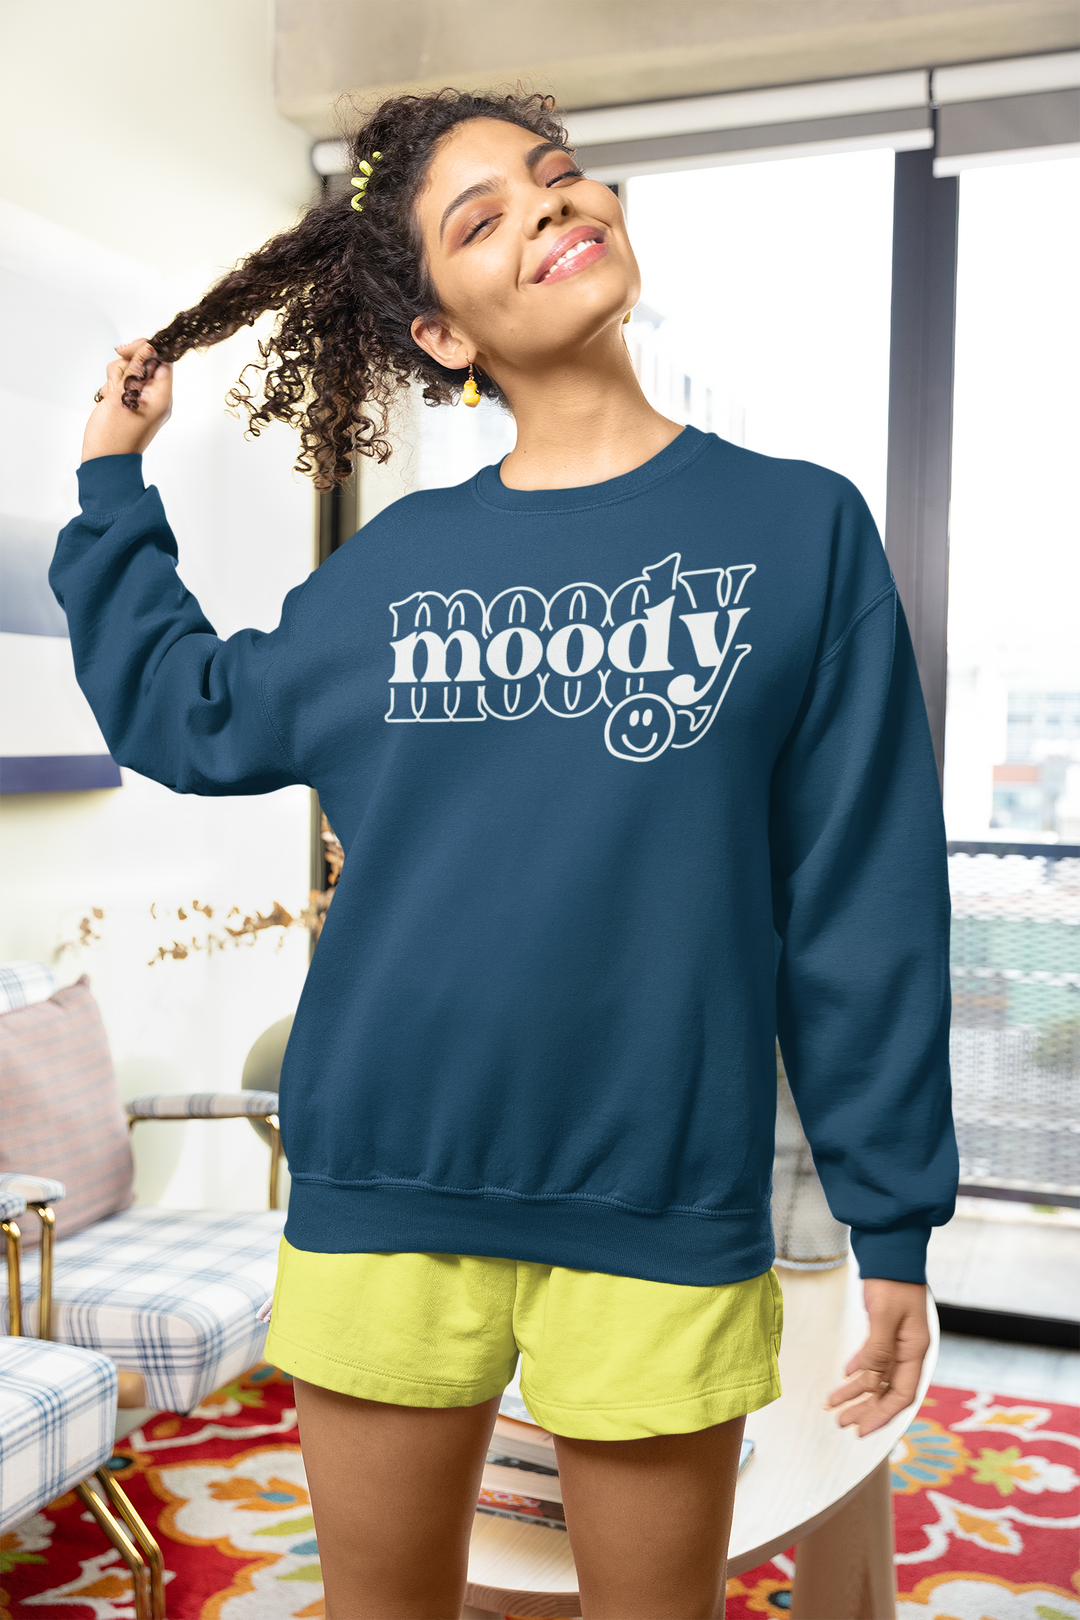 A unisex heavy blend crewneck sweatshirt, the Moody Crew, offers comfort with ribbed knit collar, no itchy seams, and a loose fit. Made of 50% cotton and 50% polyester, medium-heavy fabric.